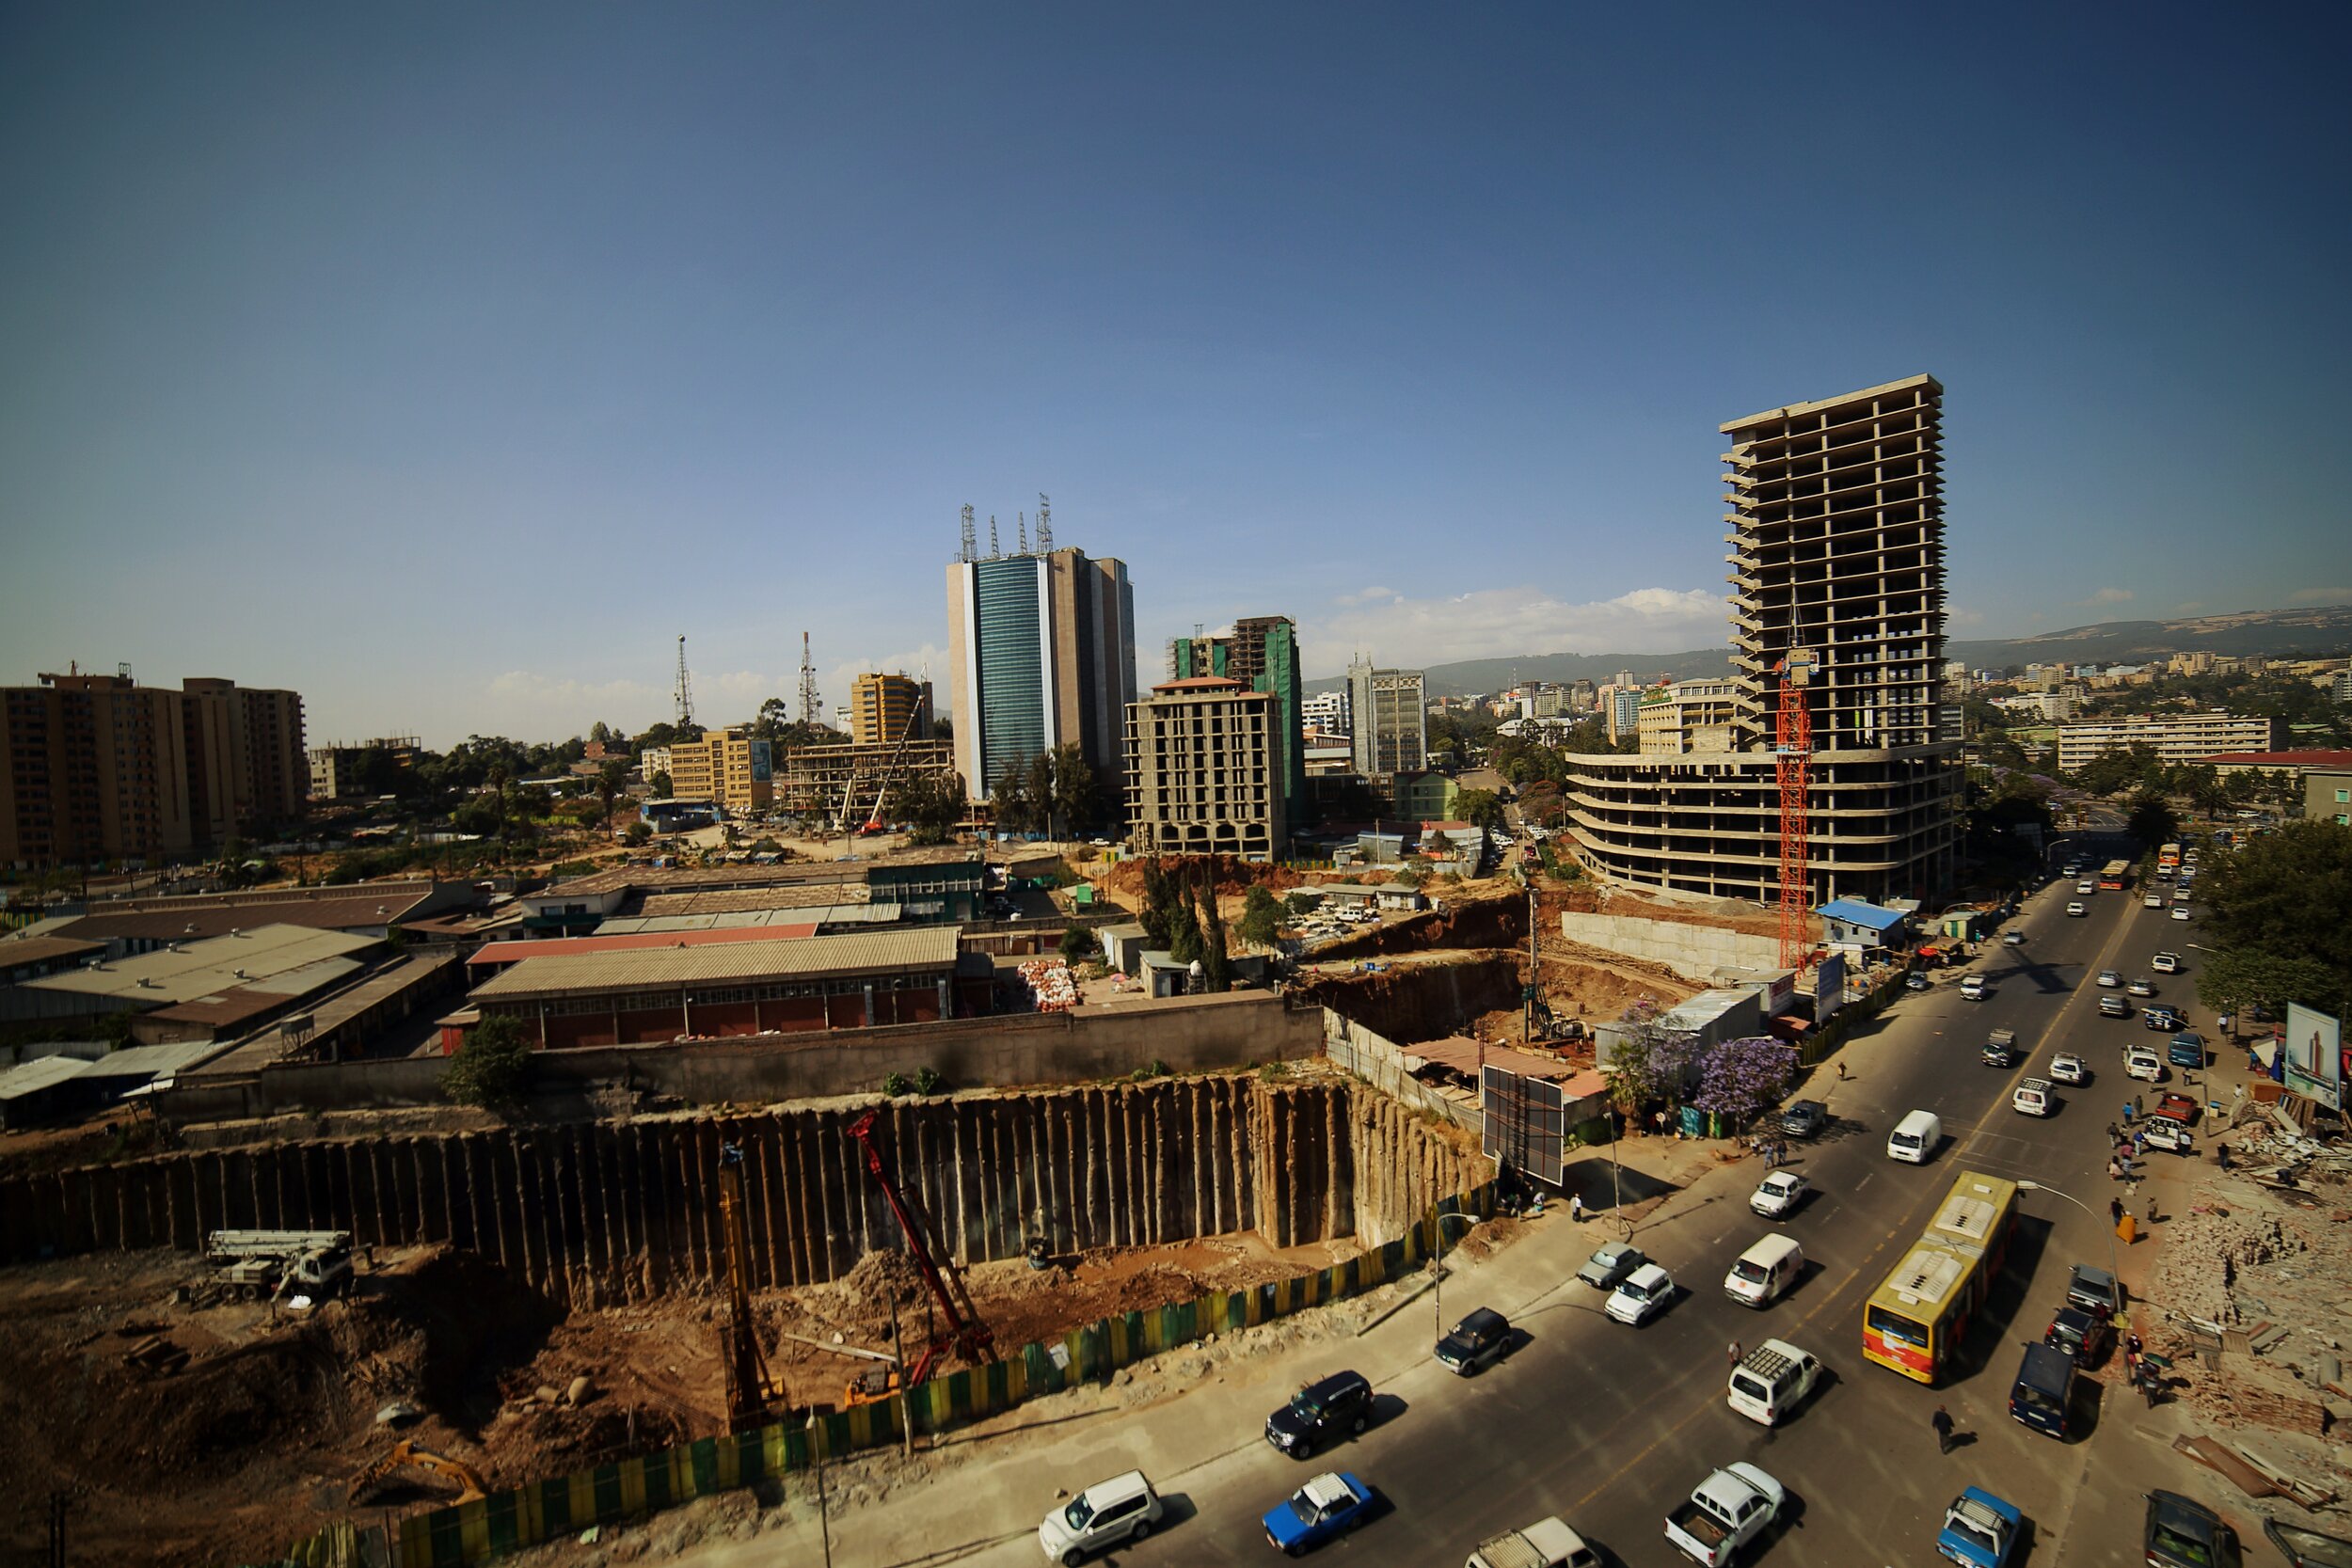 Addis Ababa is developed as a polycentric city. 